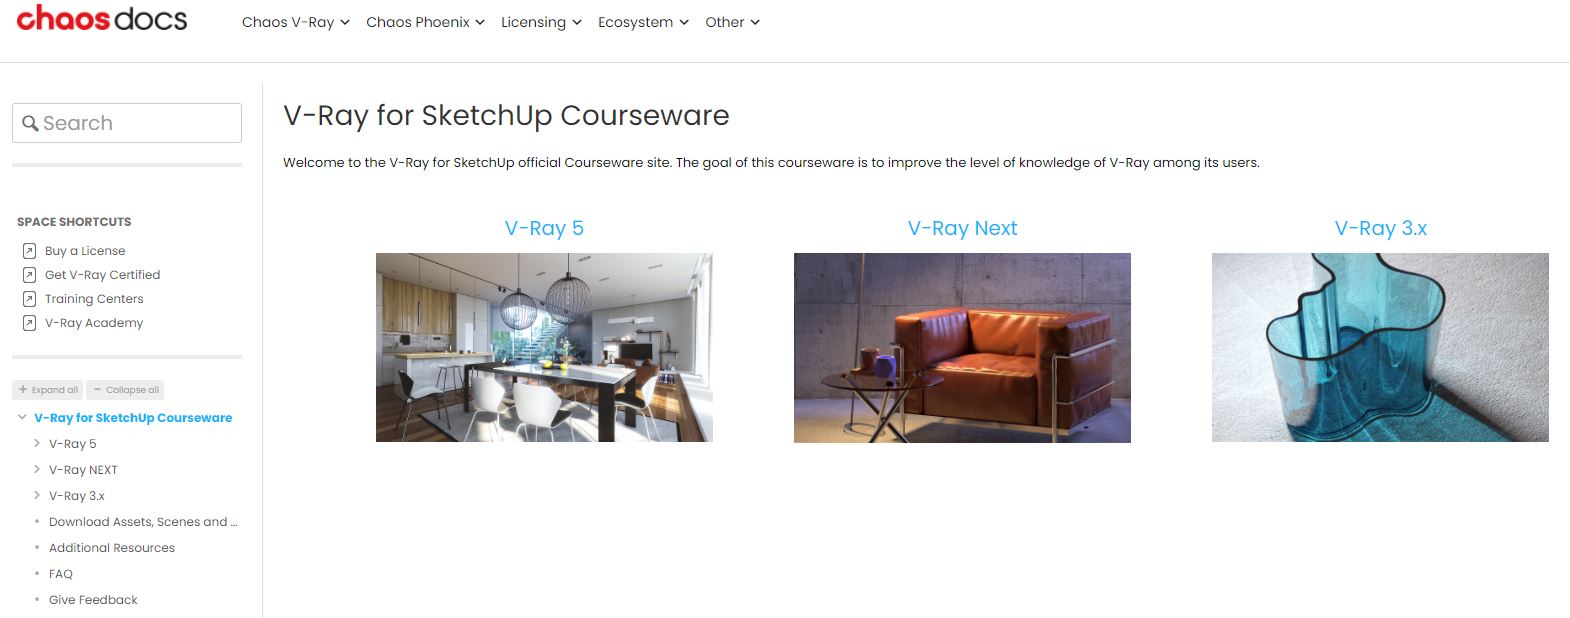 It shows various versions of V-Ray for SketchUp tutorials provided by Chaosdocs.